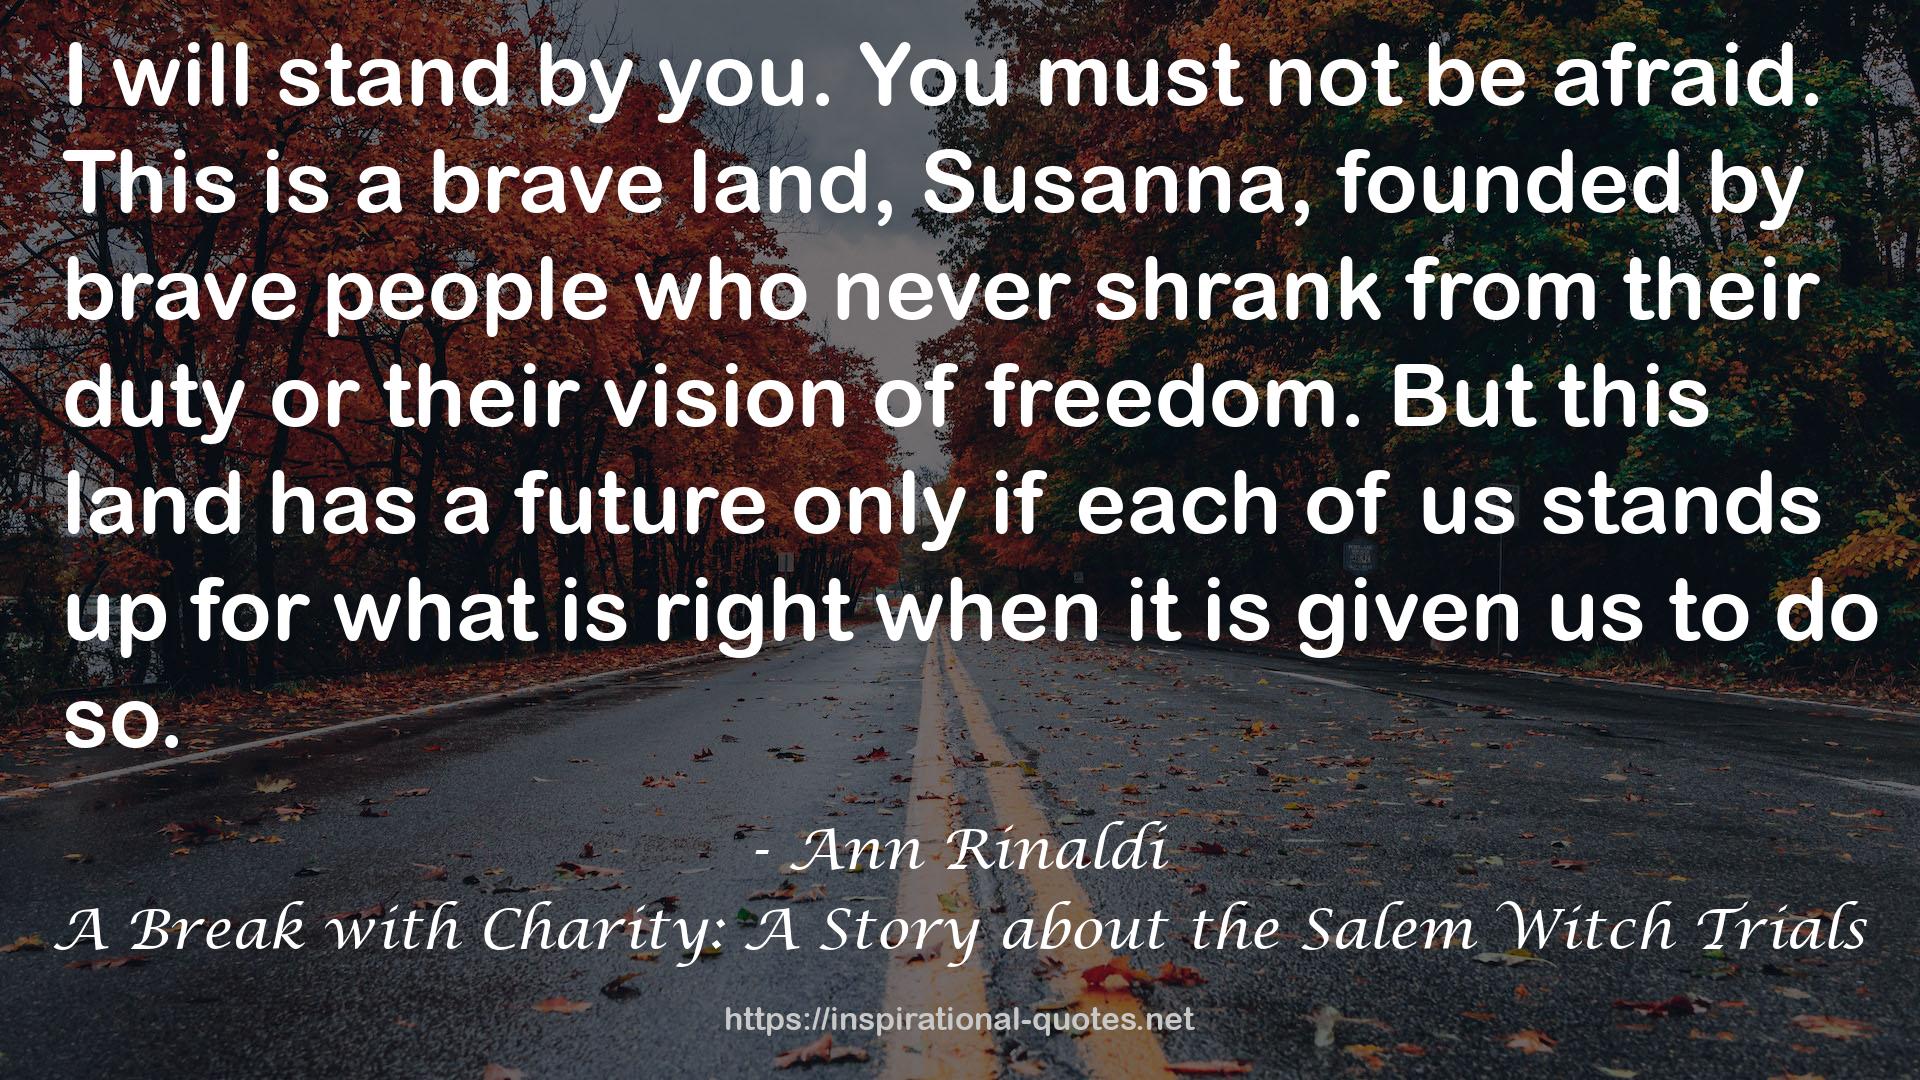 A Break with Charity: A Story about the Salem Witch Trials QUOTES